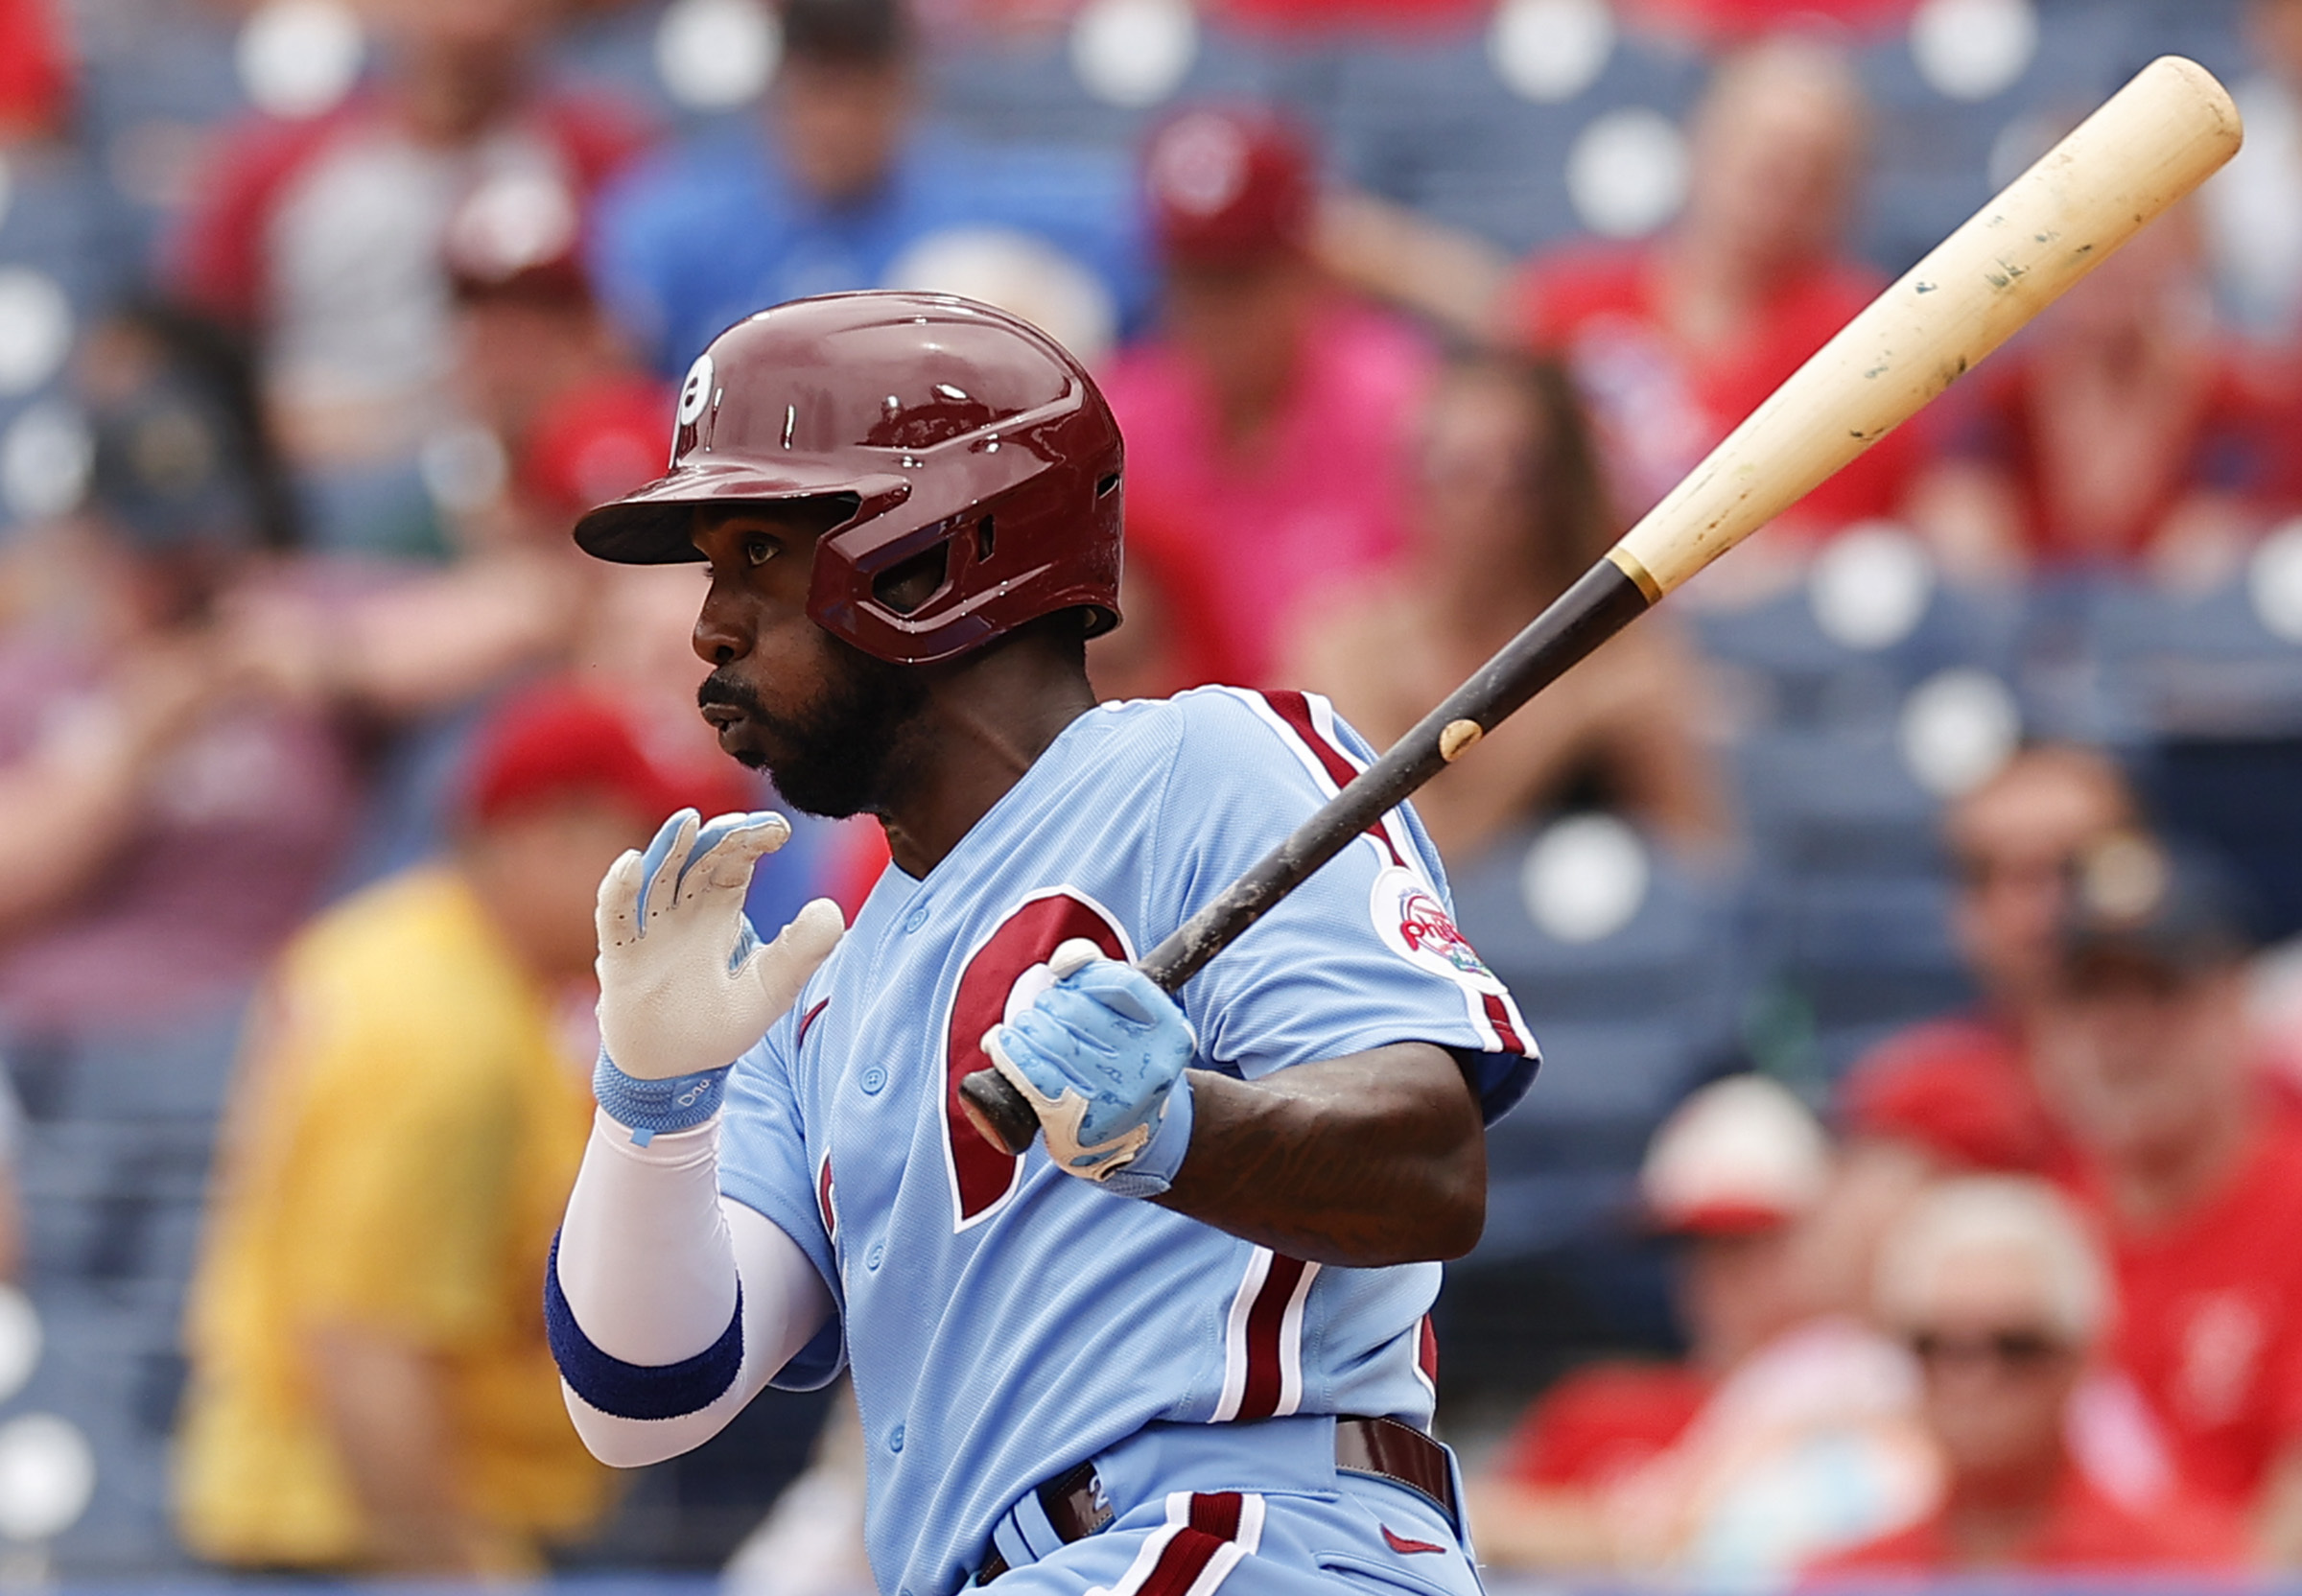 IronPigs win first game back following Daniel Brito's medical emergency   Phillies Nation - Your source for Philadelphia Phillies news, opinion,  history, rumors, events, and other fun stuff.